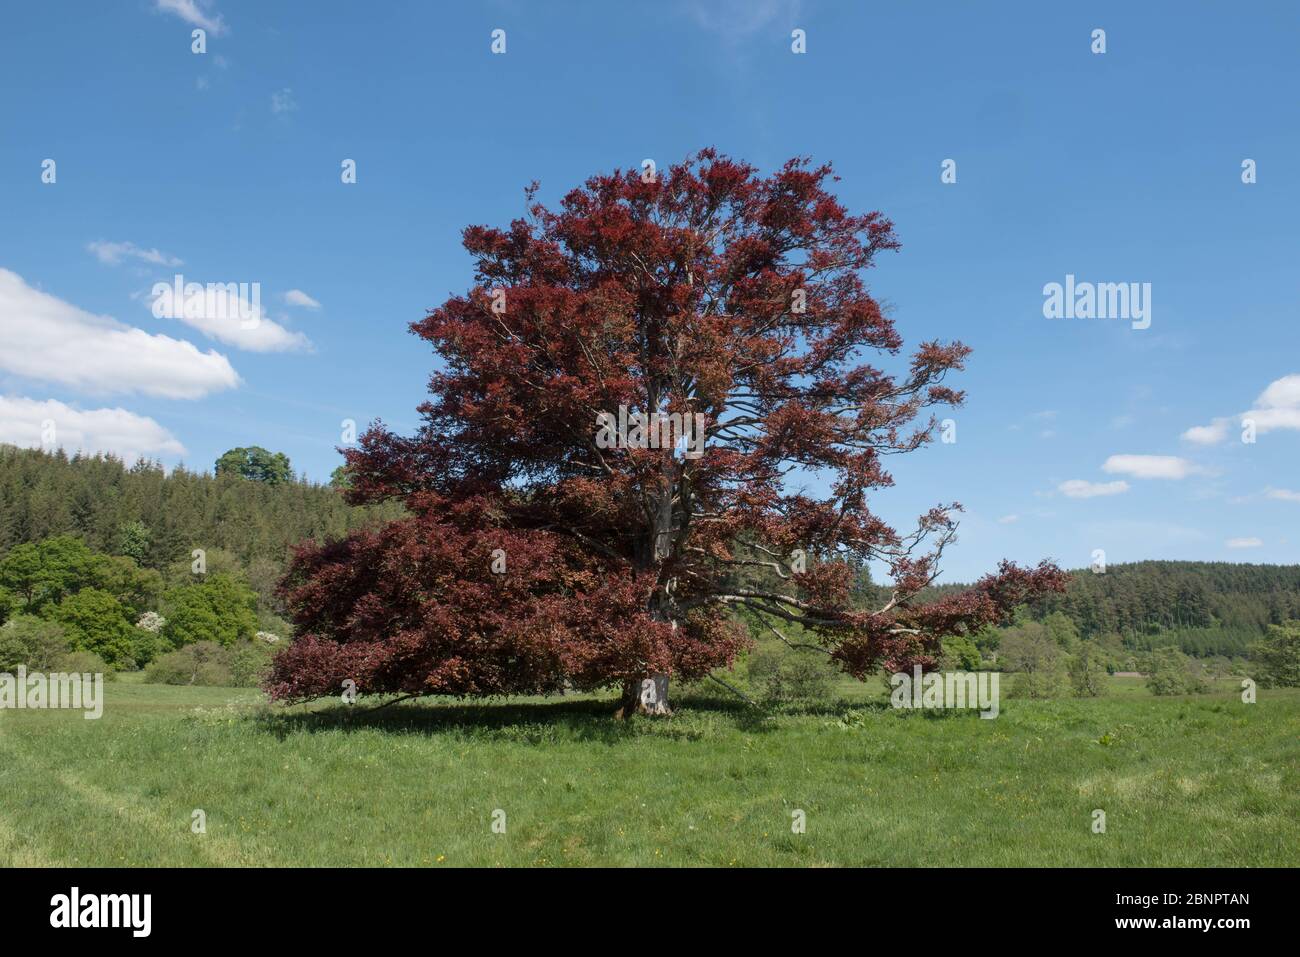 Spring Foliage of an Ancient Copper Beech Tree (Fagus sylvatica purpurea) Growing in a Countryside Field and a Bright Blue Sky Background Stock Photo